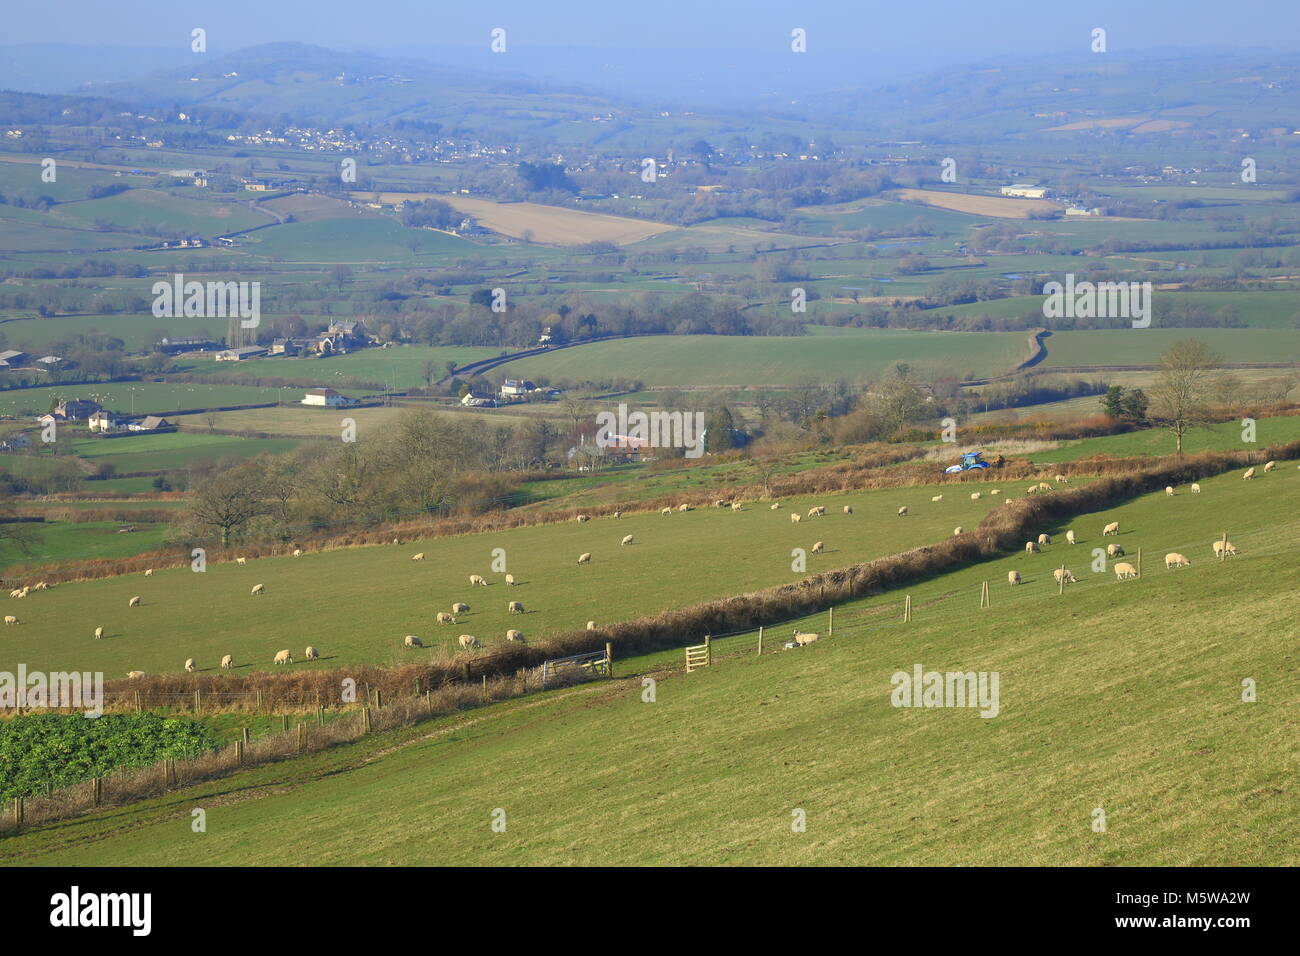 Flock of sheep graze on the farmland near Musbury Hill in East Devon Area of Outstanding Natural Beauty (AONB) Stock Photo